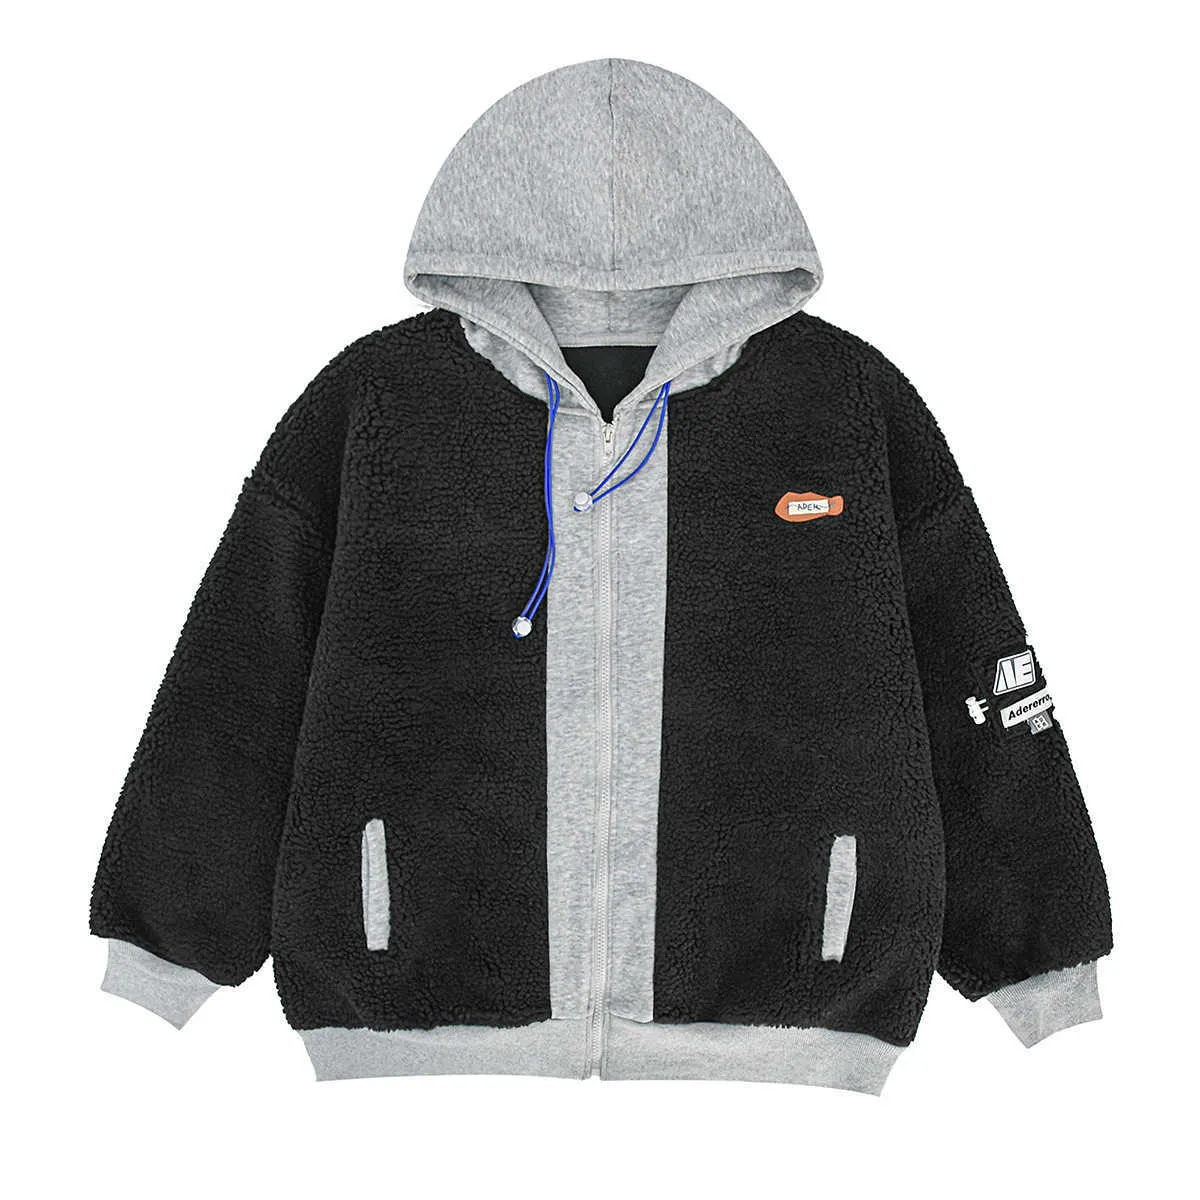 Men's Jackets Ader coat men's women's autumn and winter new ader loose fleece fake two-piece lamb wool fashion